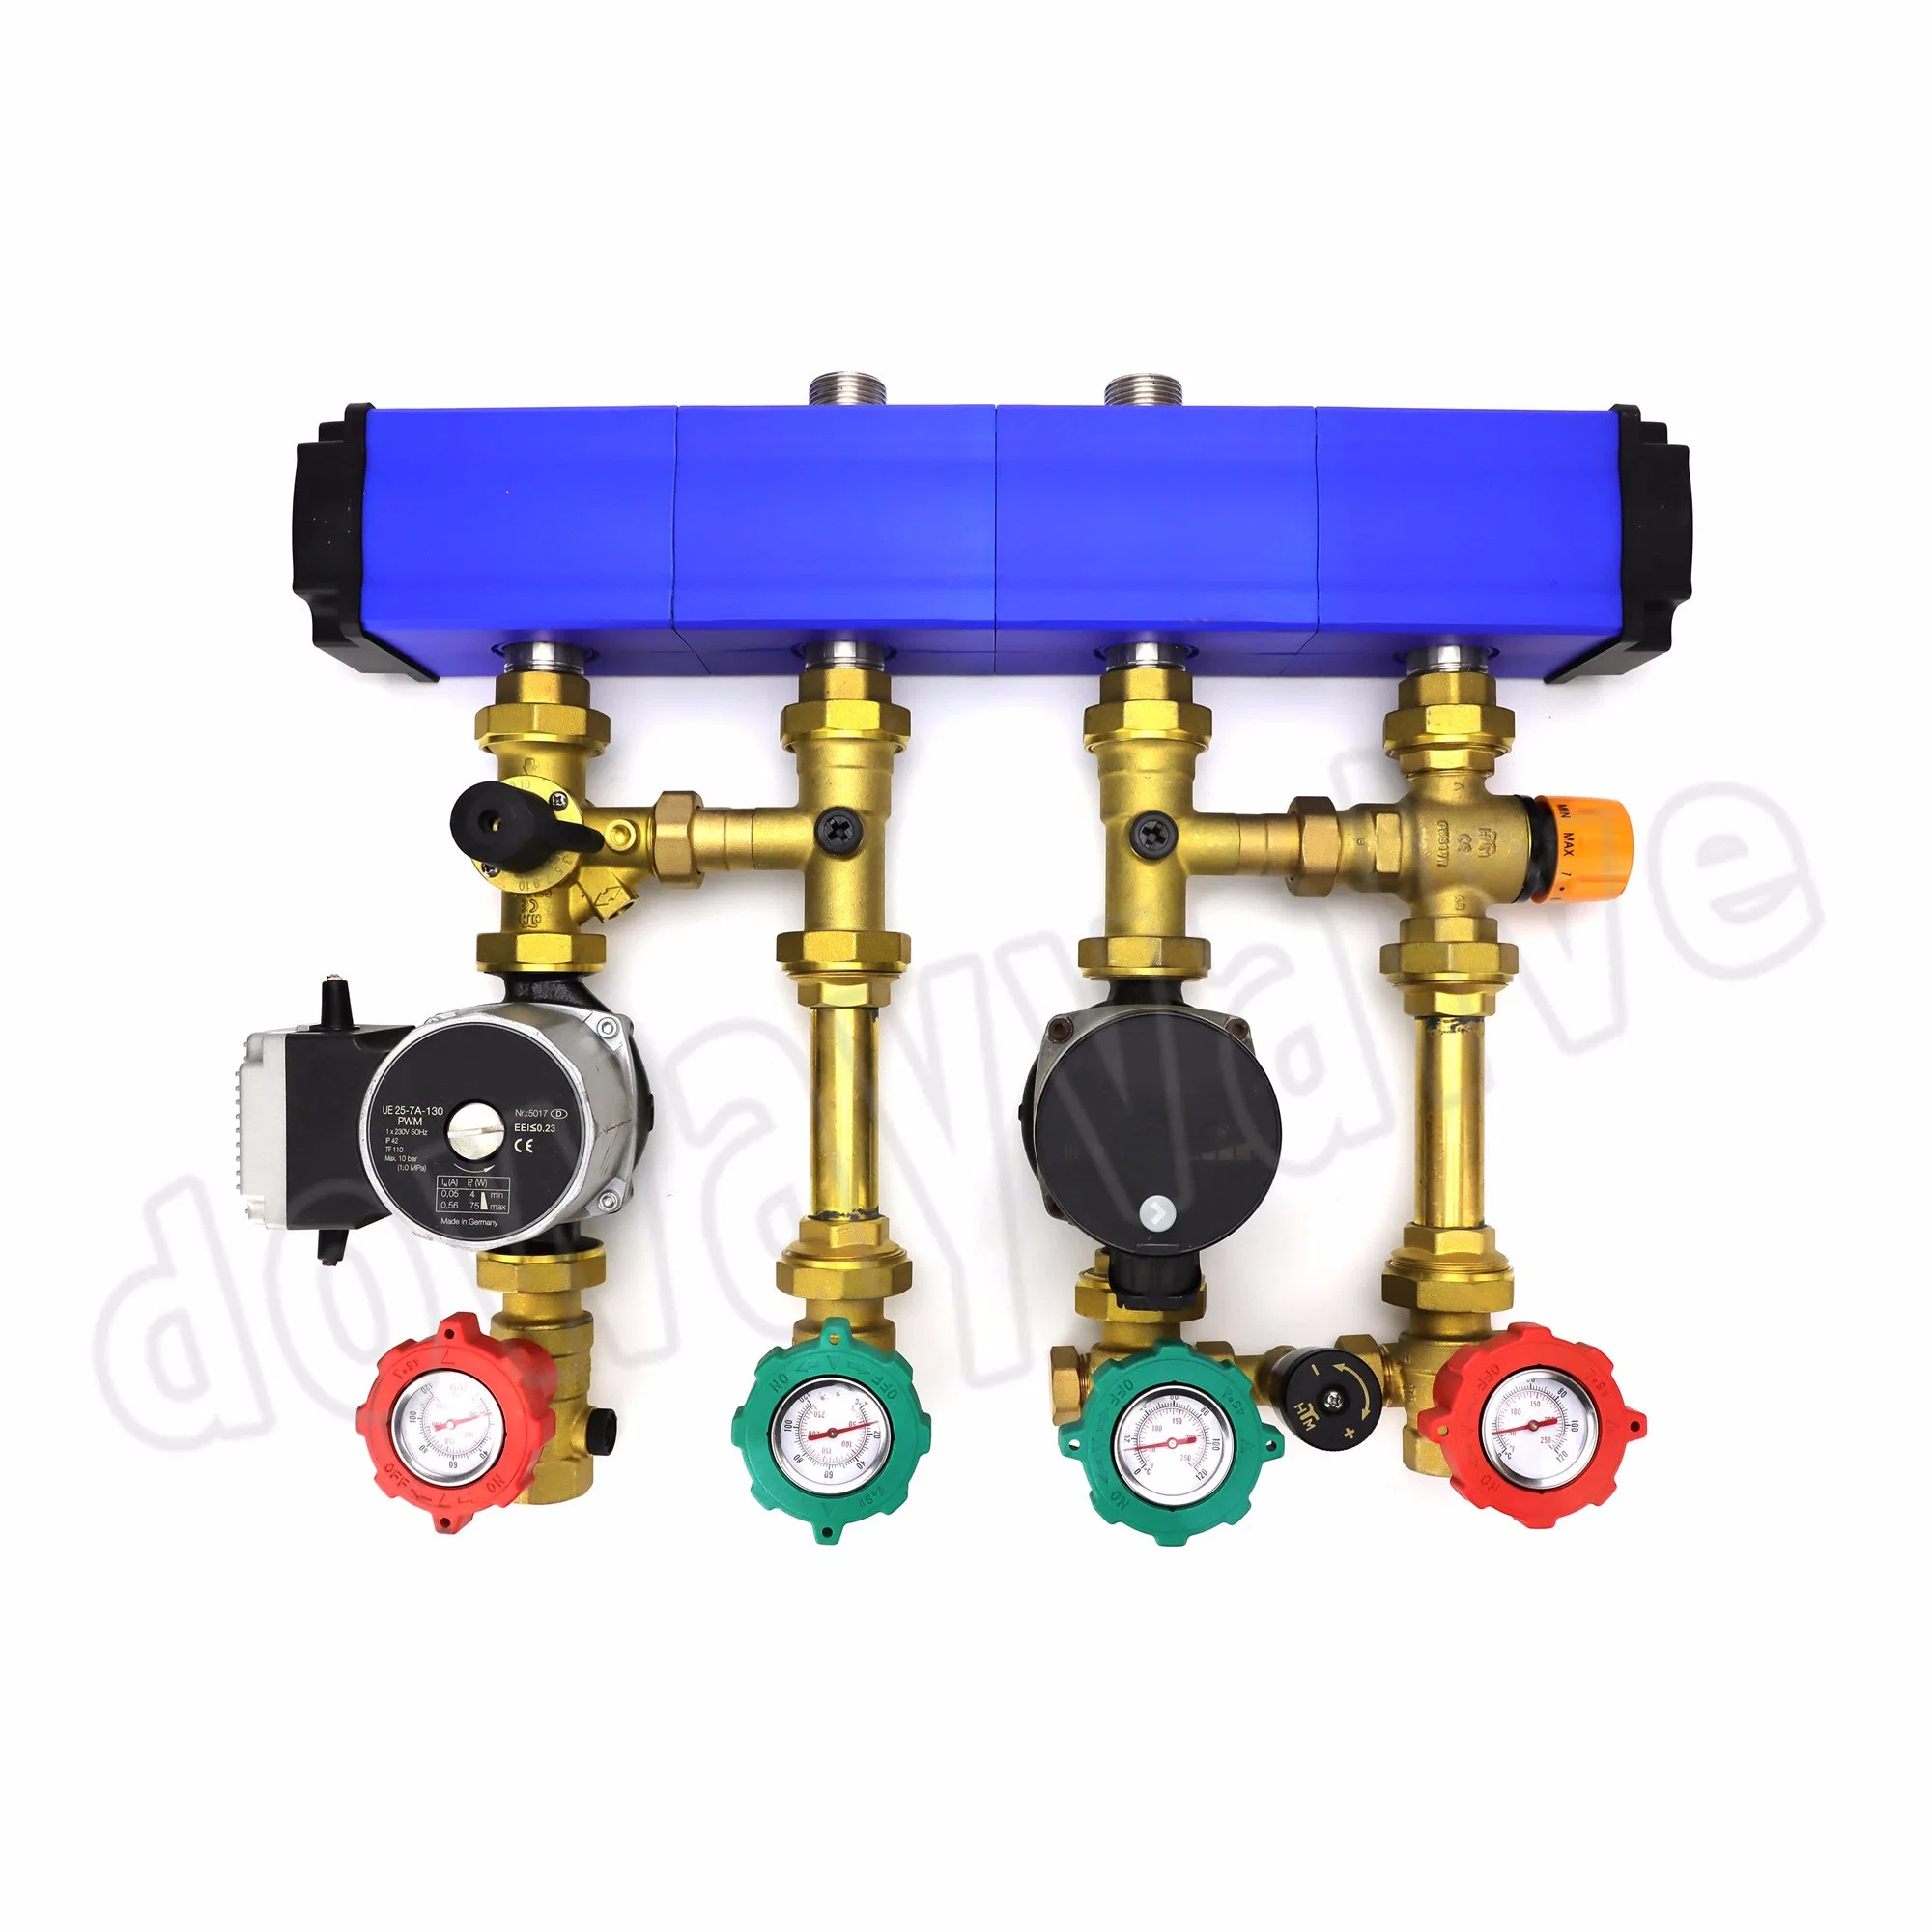 Central Heating Pump Group with Mixing Valve